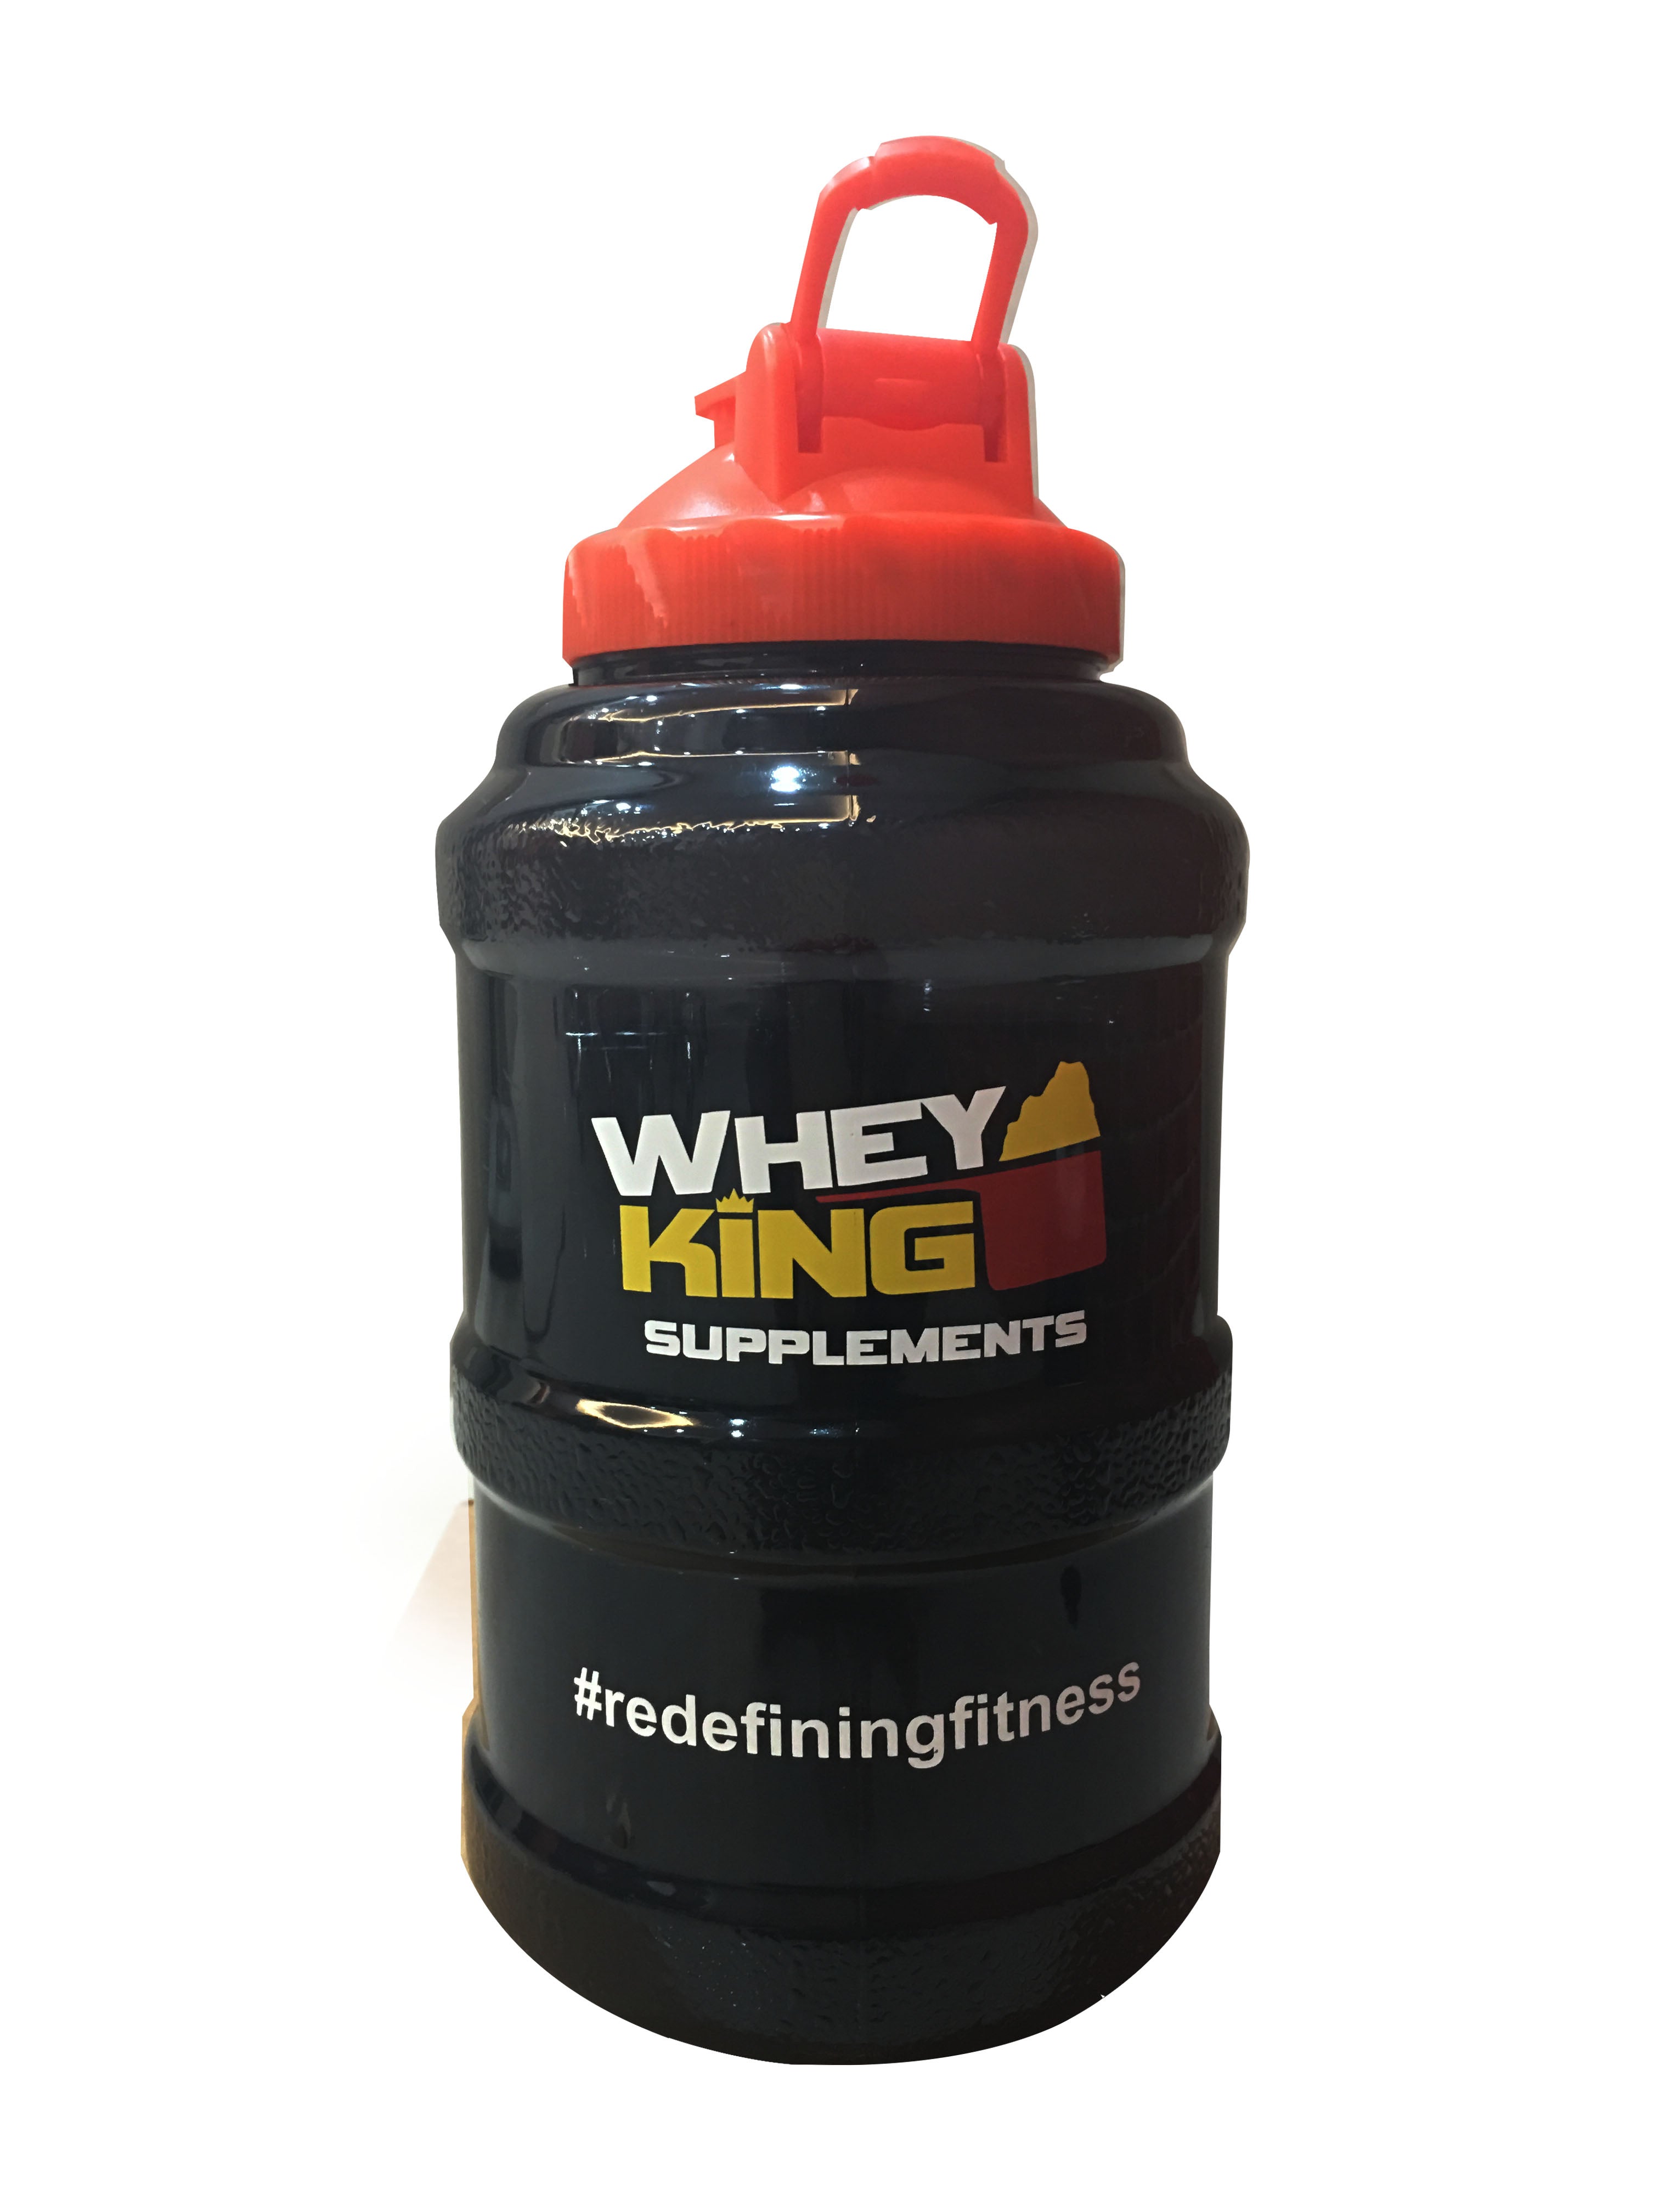 Shop WHEY KING MEGA JUG Online | Whey King Supplements Philippines | Where To Buy WHEY KING MEGA JUG Online Philippines